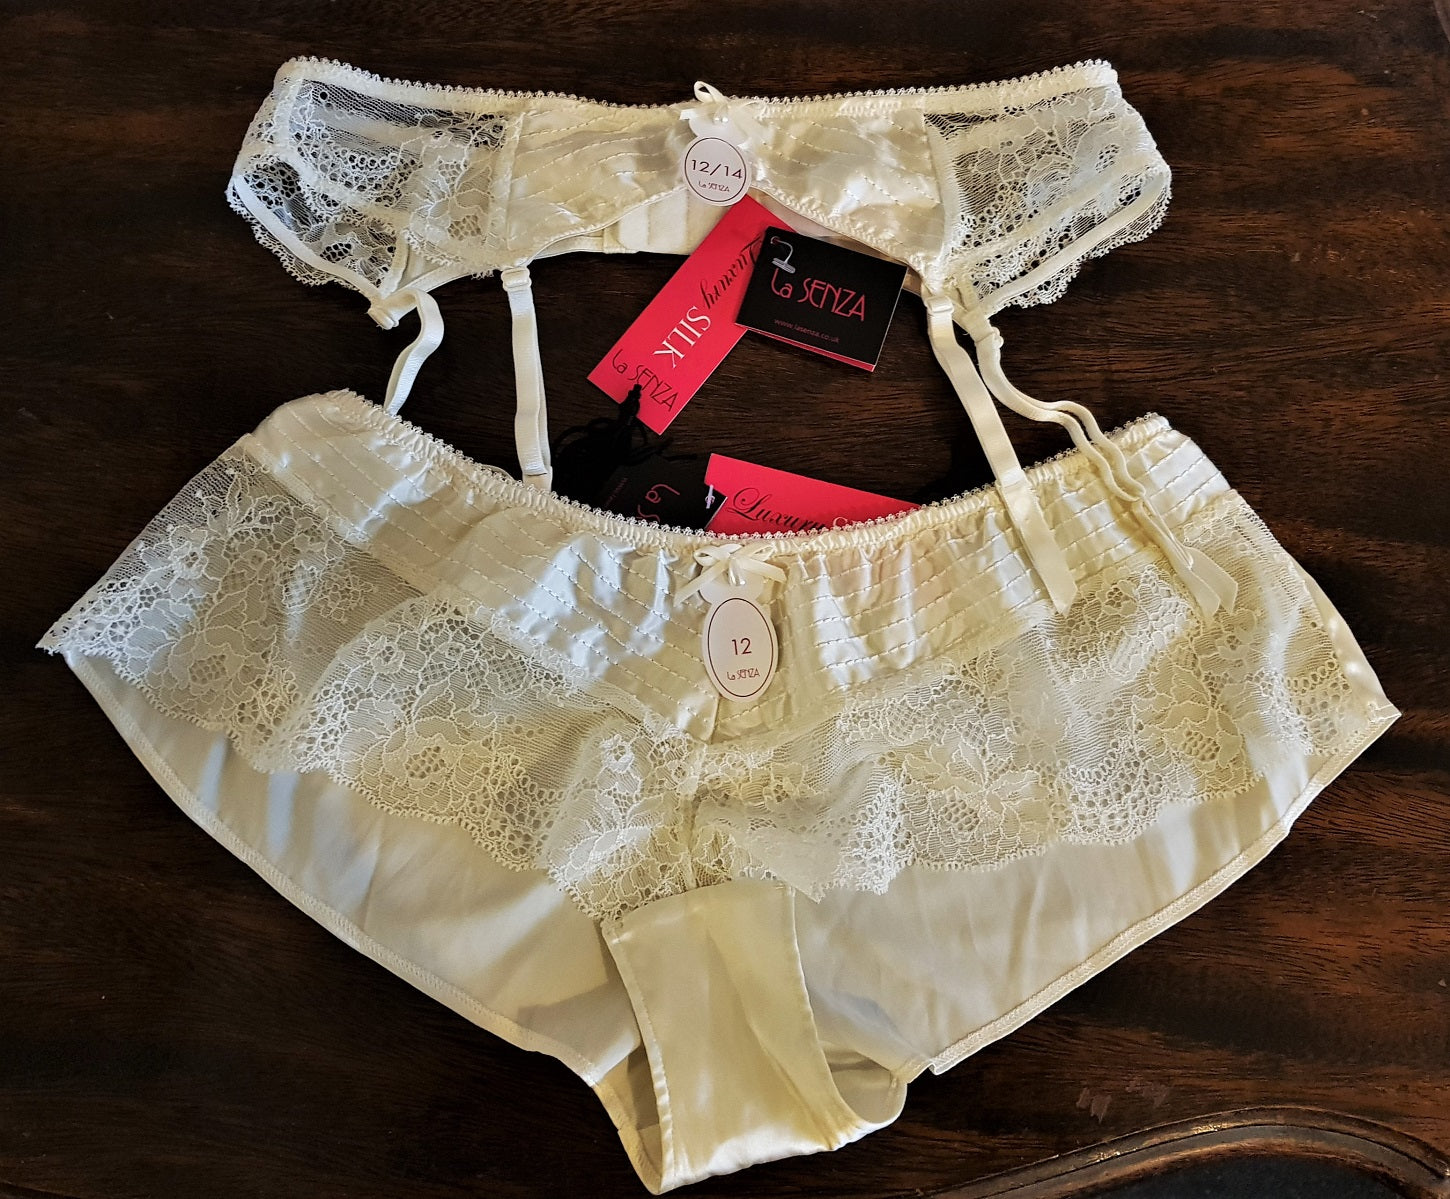 La Senza ivory silk knickers and suspenders – The Frockery